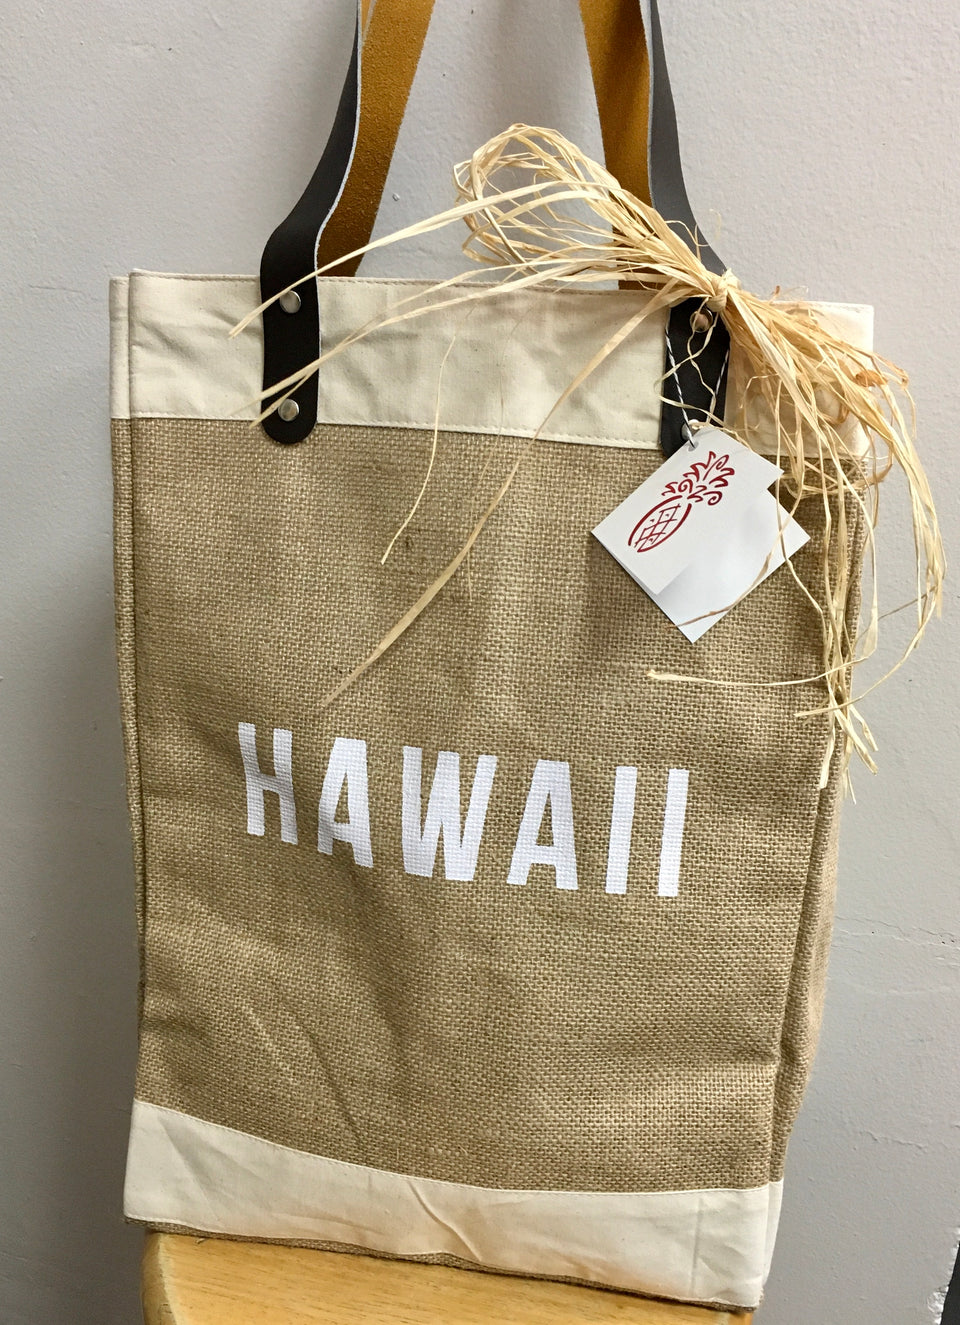 Hawaii burlap tote - includes free delivery on Oahu tote